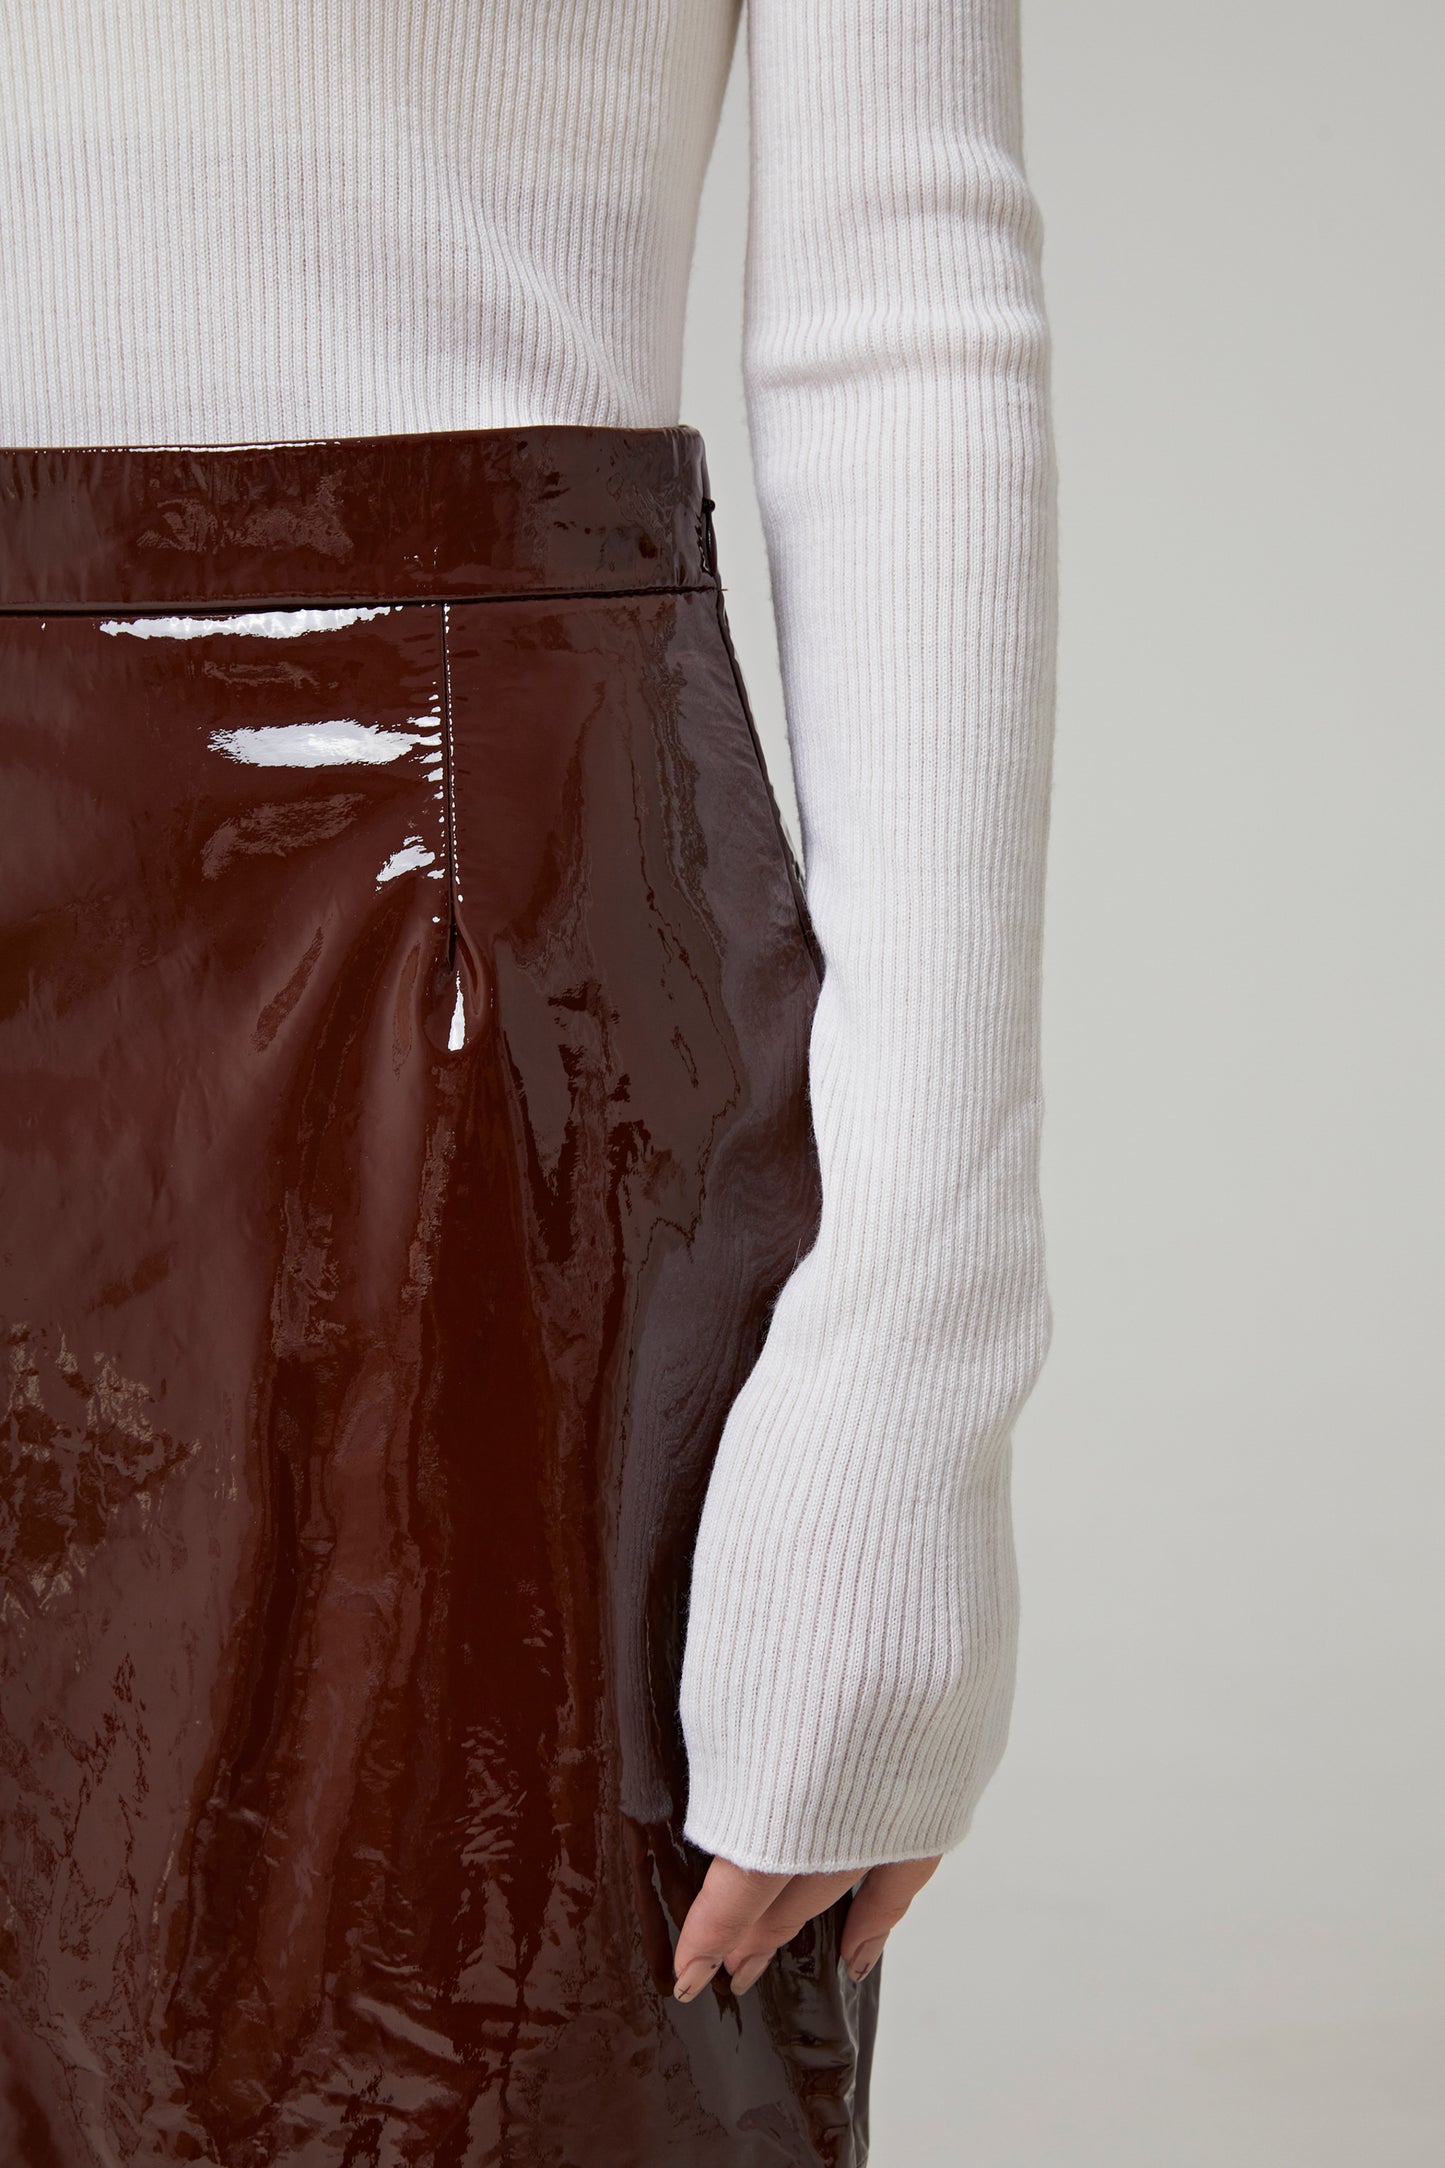 MIDI SKIRT IN PATENT LEATHER